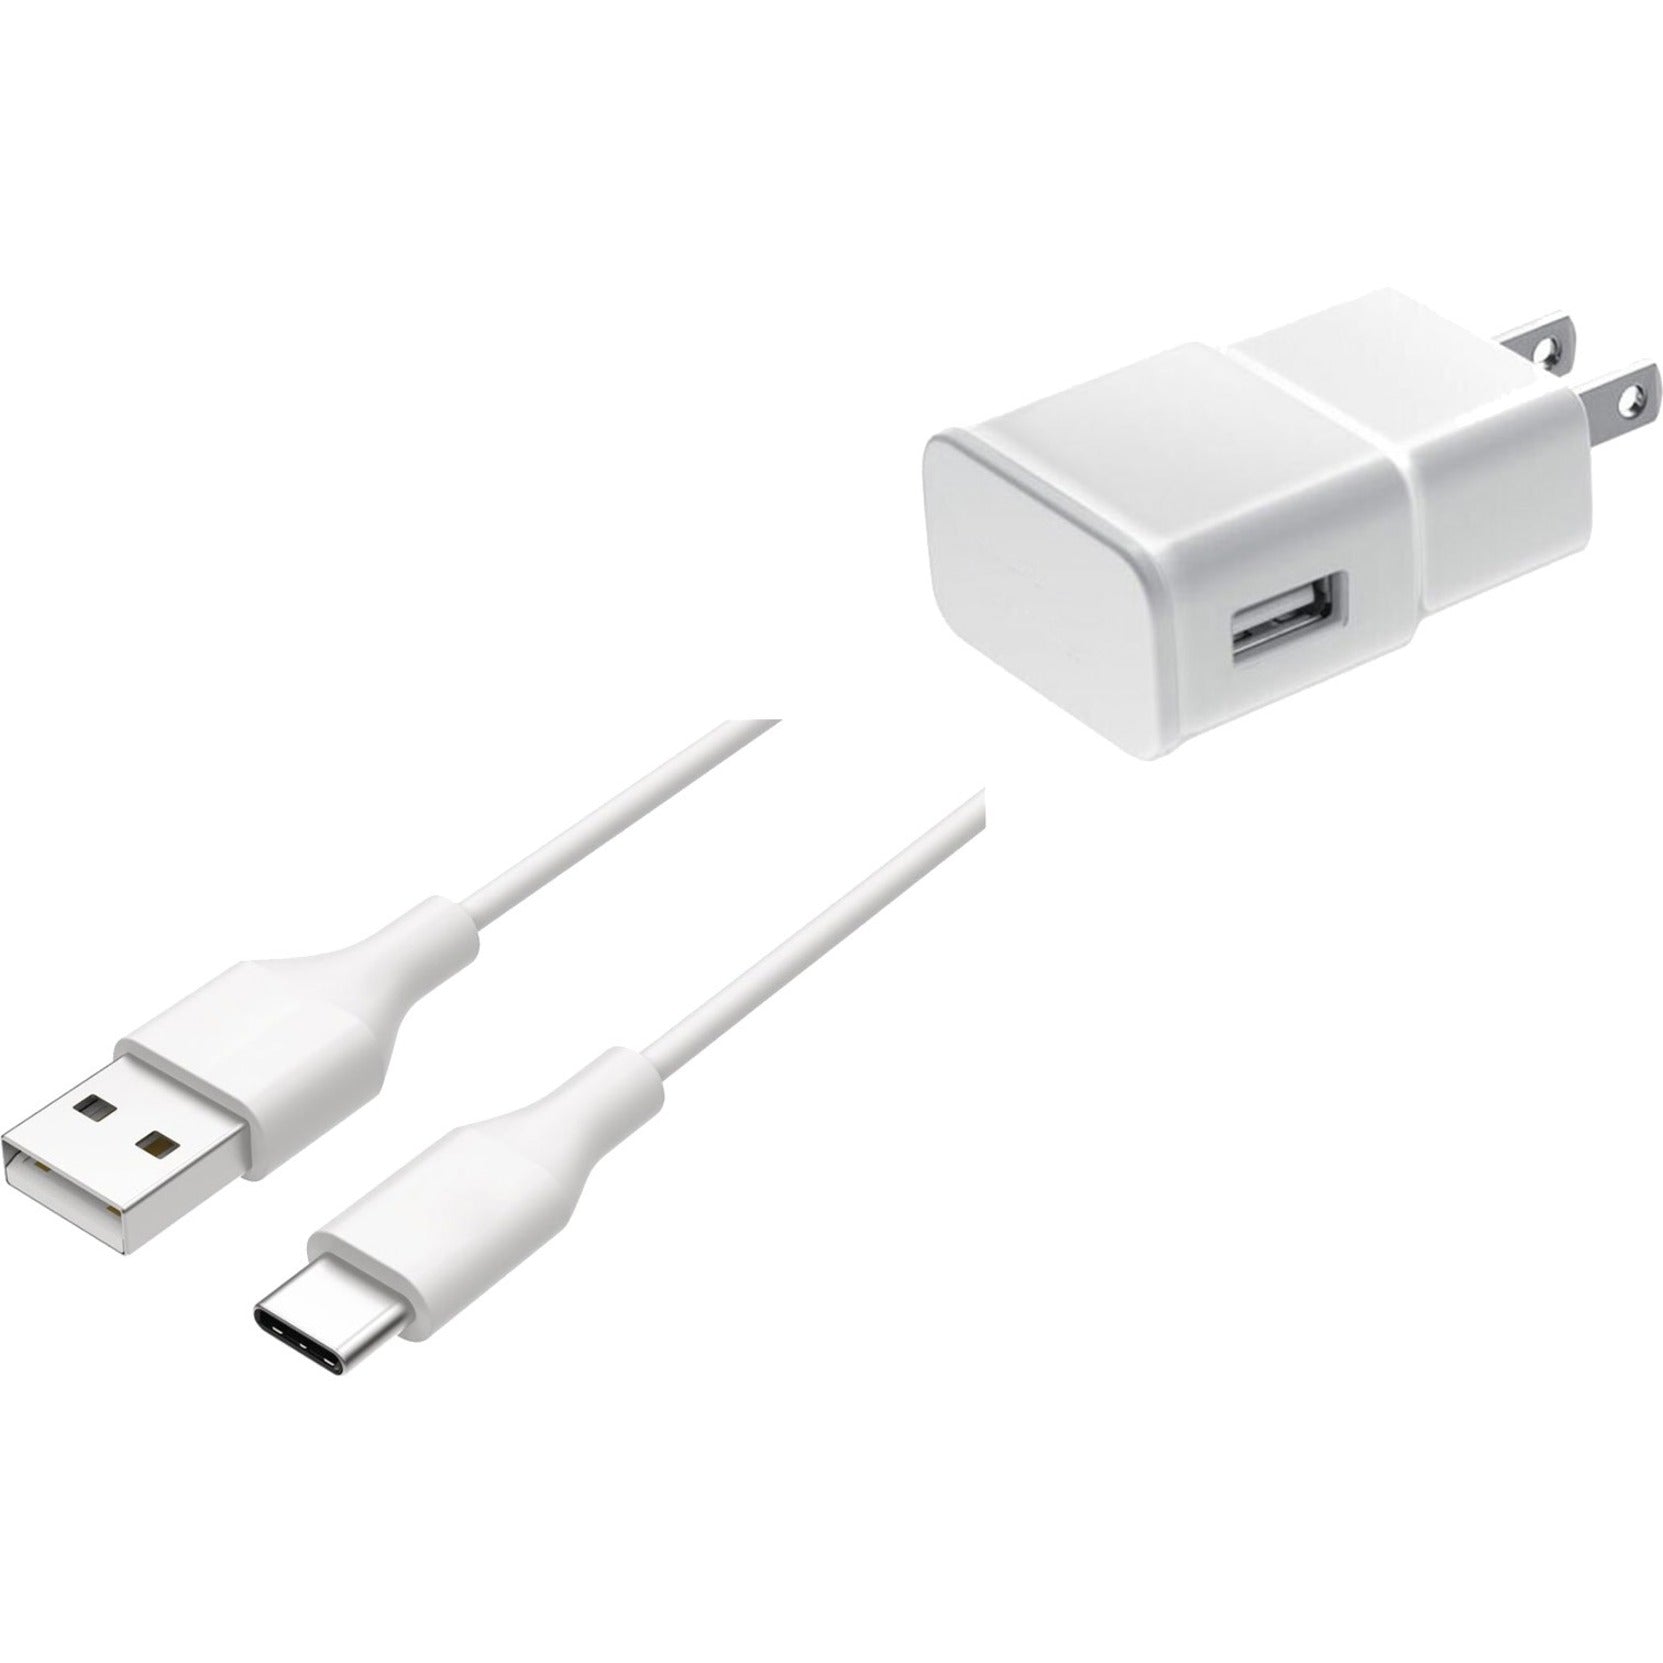 4XEM 4XSAMKITUSBCW6 Samsung USB-C 6FT Charger Kit (White), 6ft Cable, 1 Year Warranty